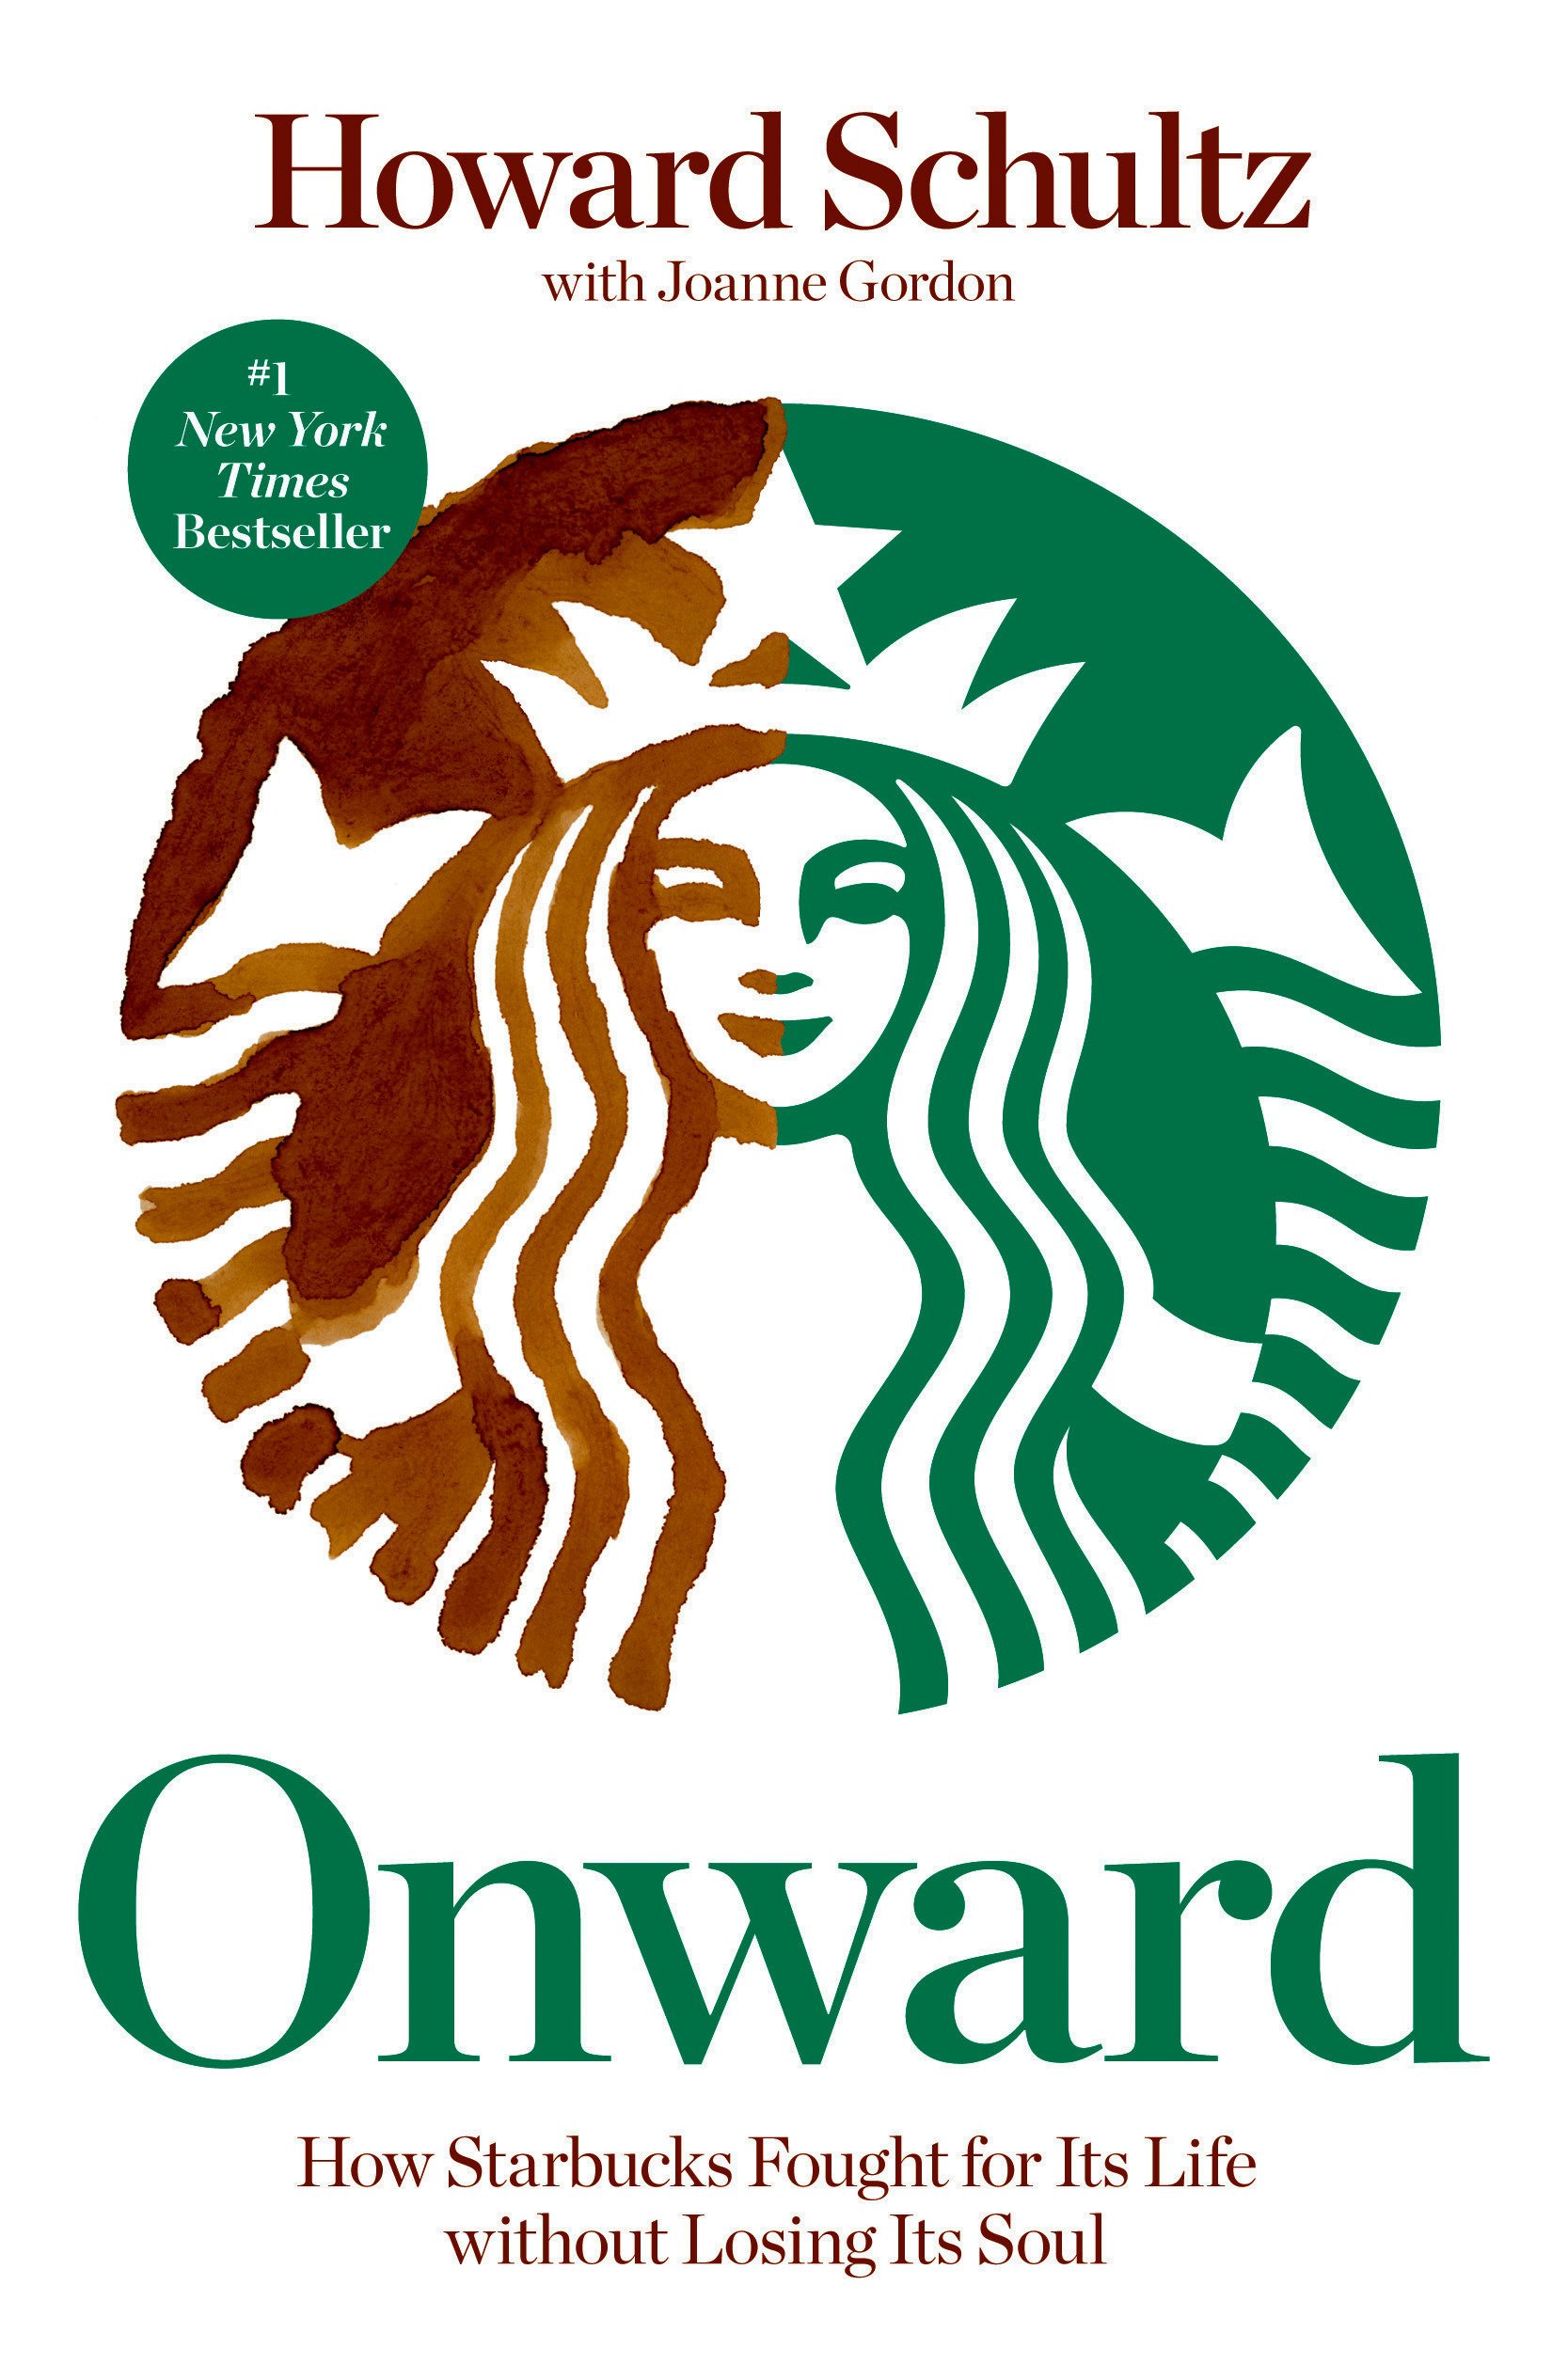 Howard Schultz, Joanne Gordon Onward_How Starbucks Fought for Its Life without Losing Its Soul .jpg